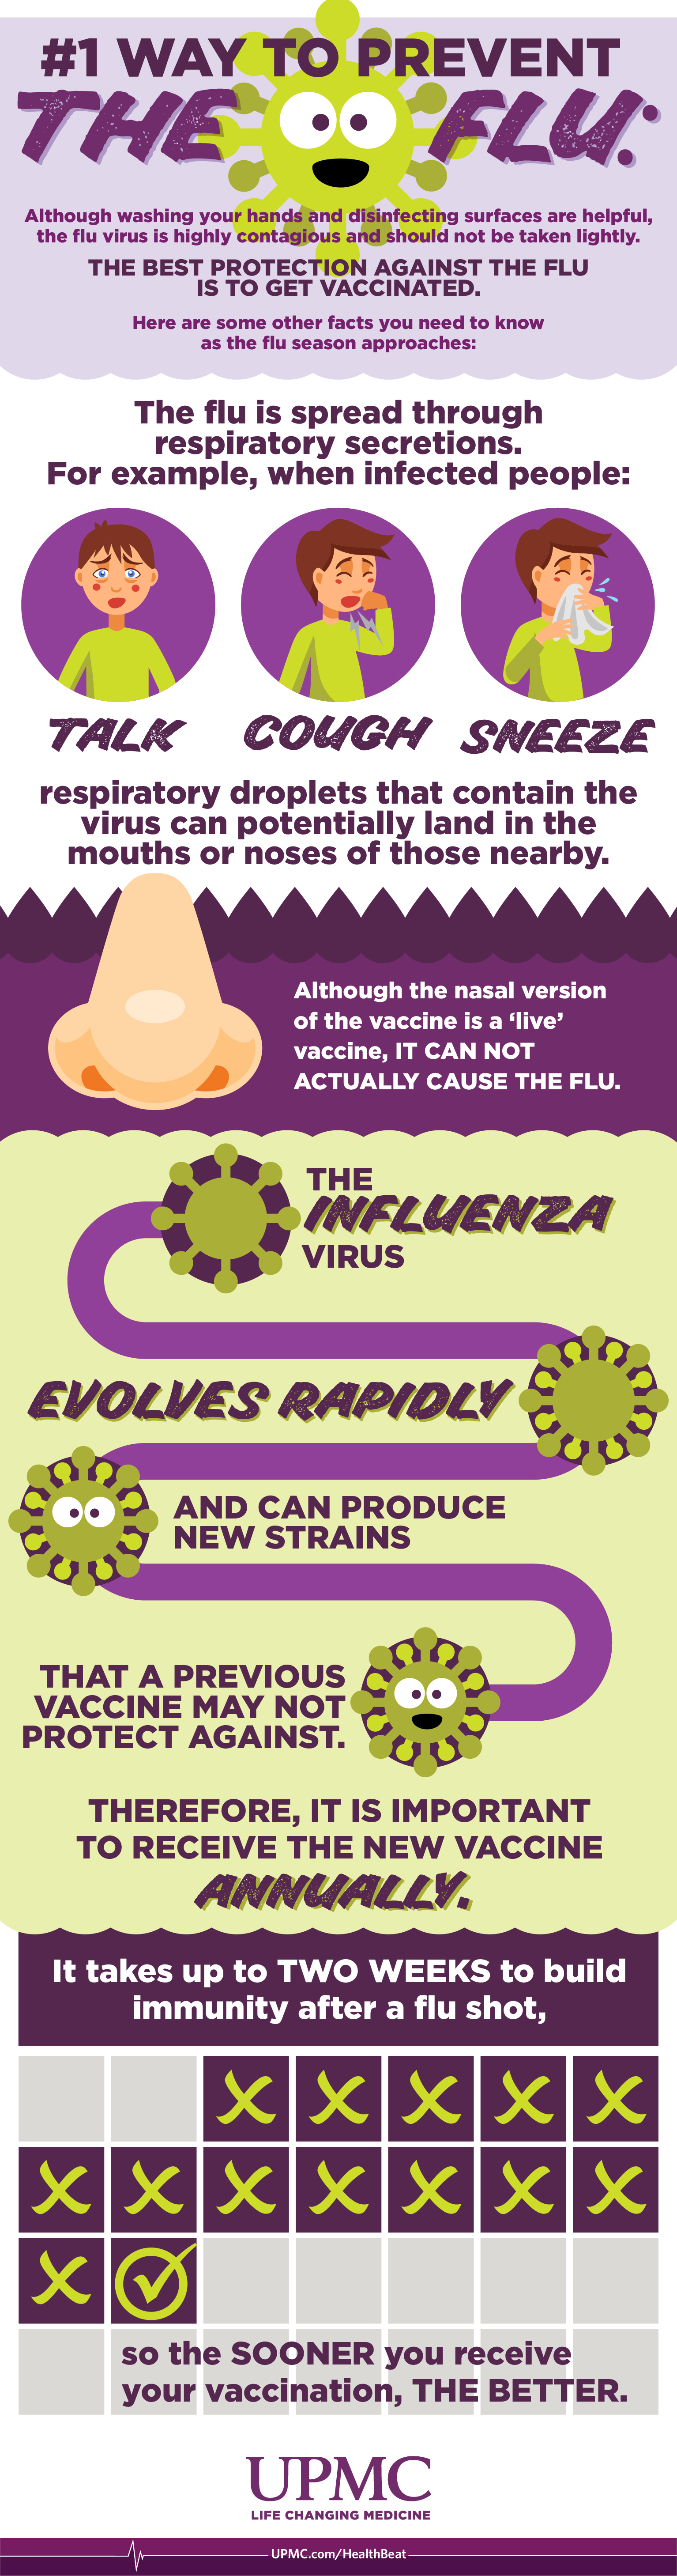 Learn more about how to treat the flu